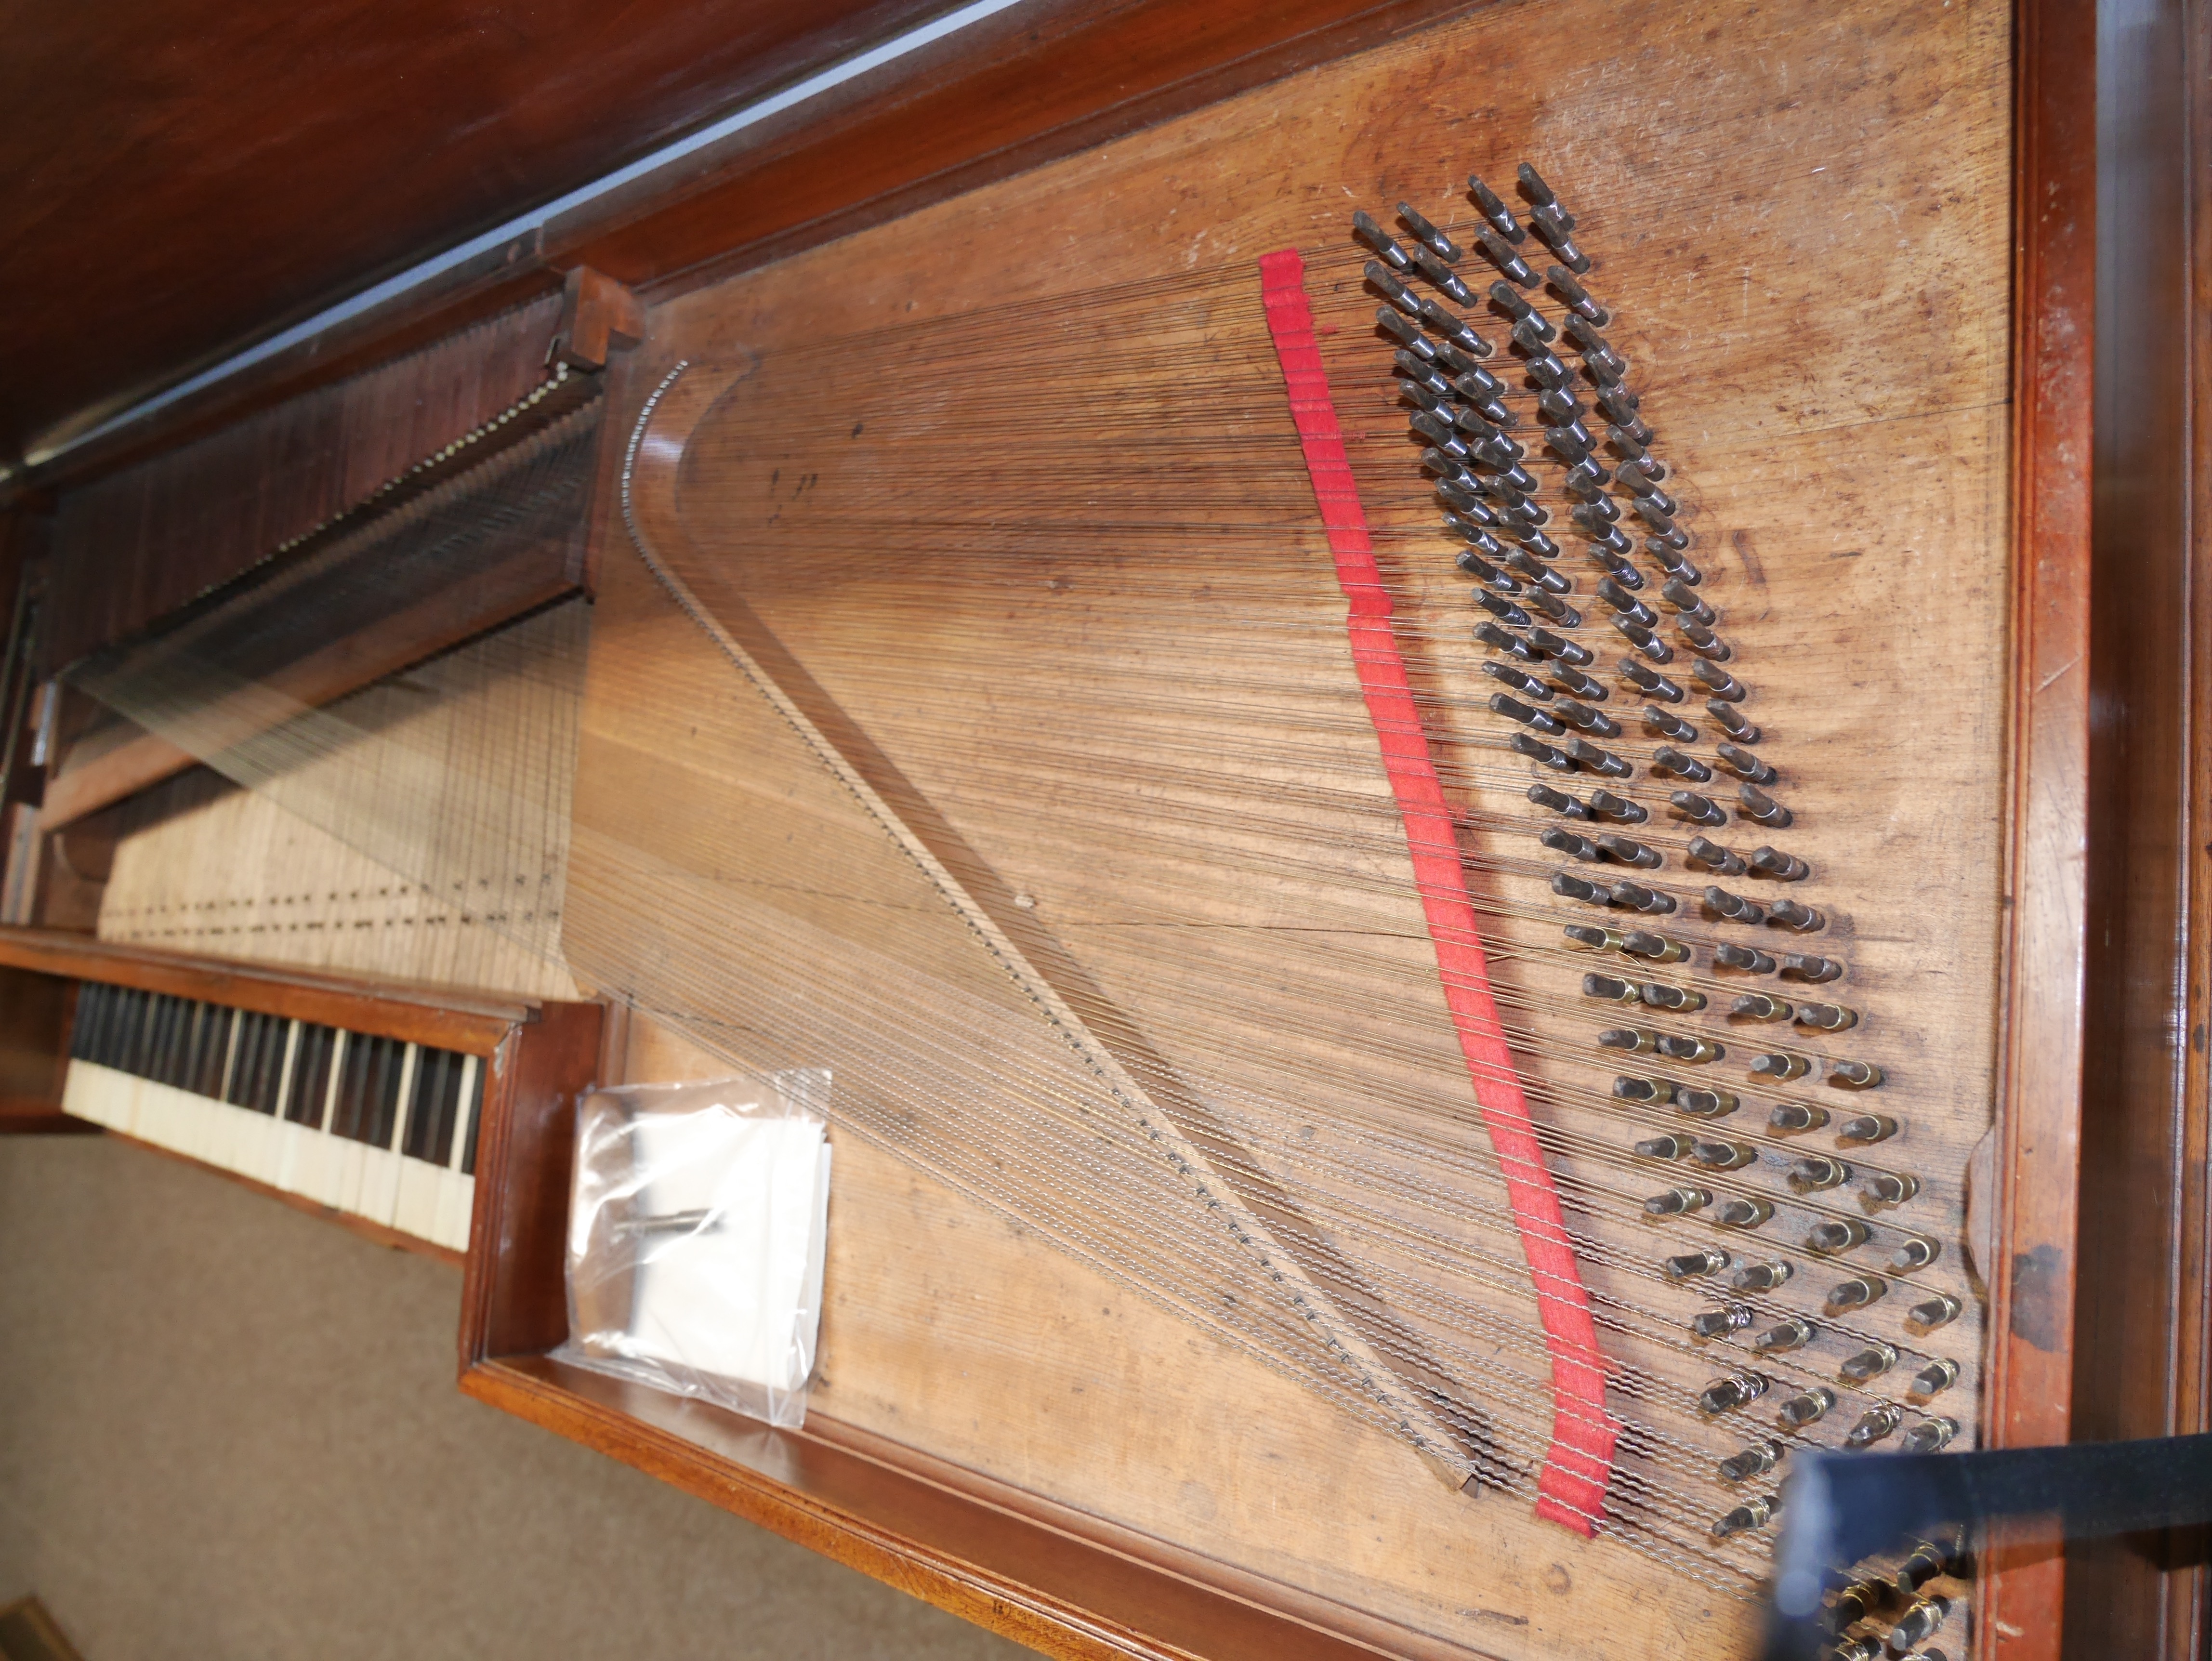 Longman & Broderip - Square Piano London good order all keys play but benefit from tunning - Image 2 of 10